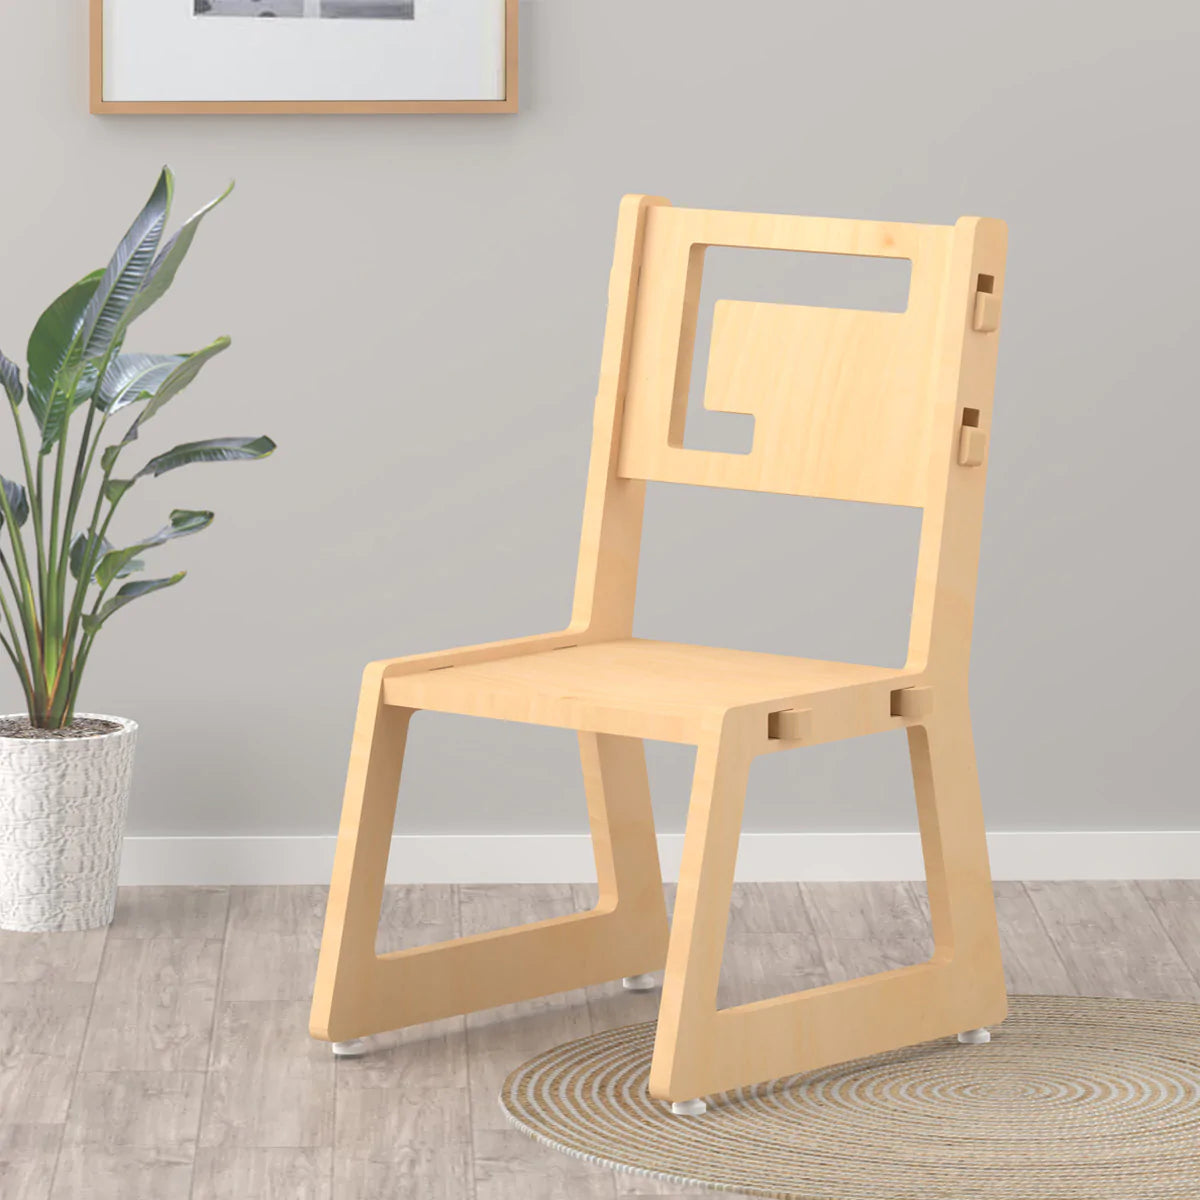 Buy Blue Apple Wooden Chair - Natural - Learning Furniture - SkilloToys.com